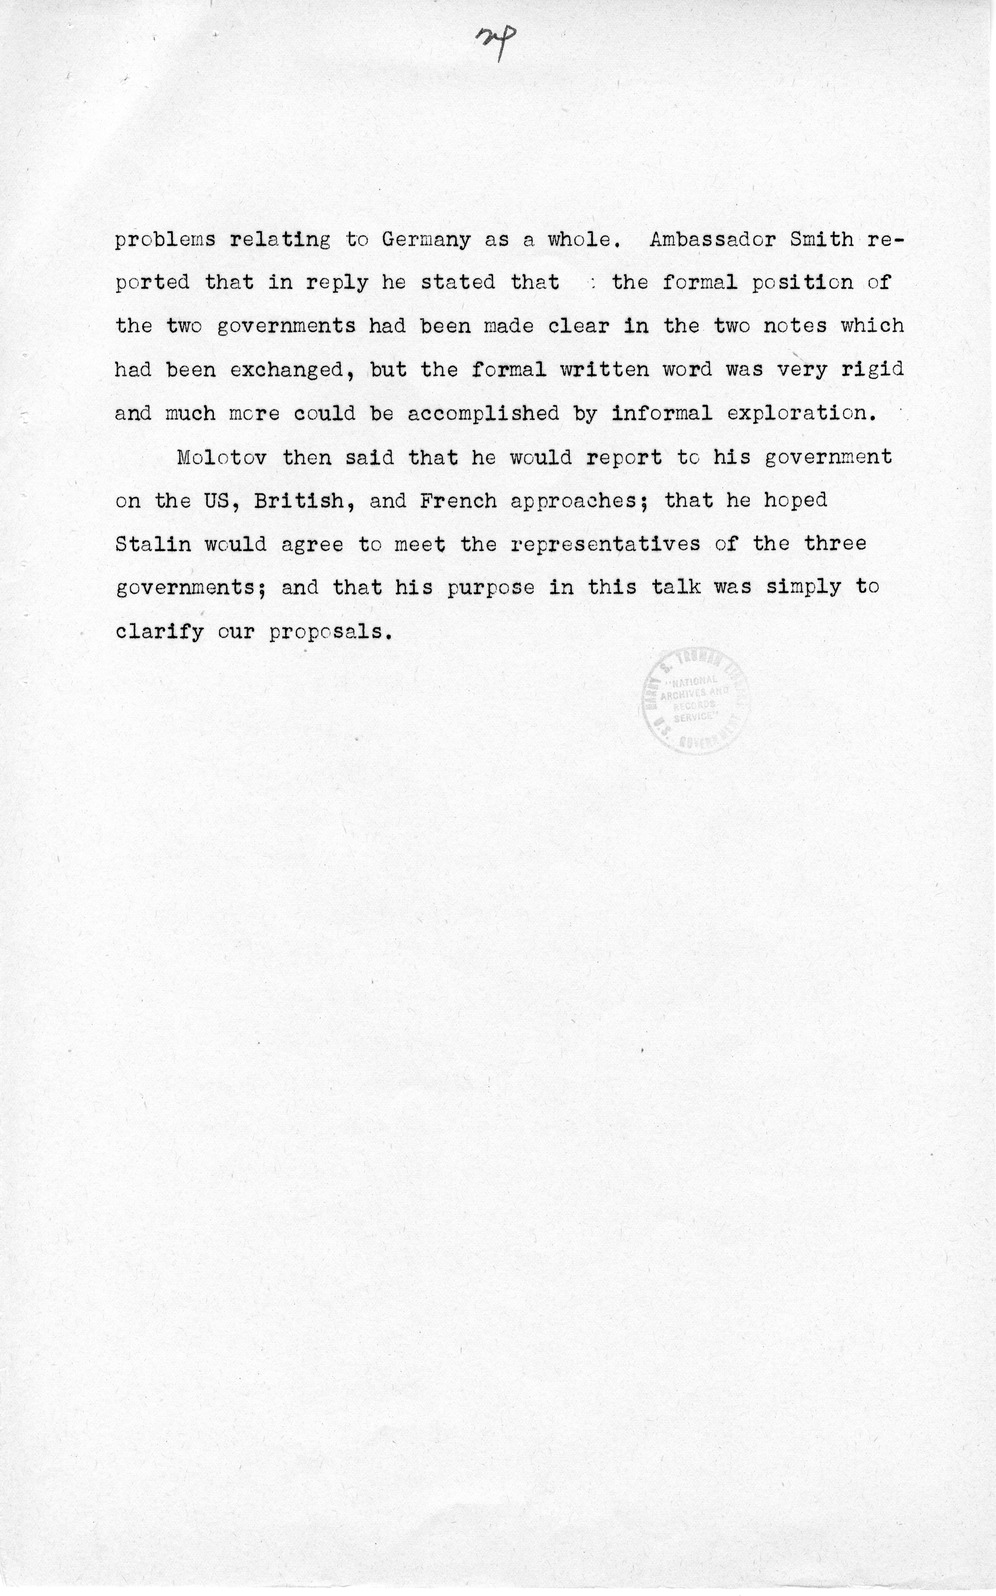 Press Release, The Berlin Crisis: A Report on the Moscow Discussions, 1948